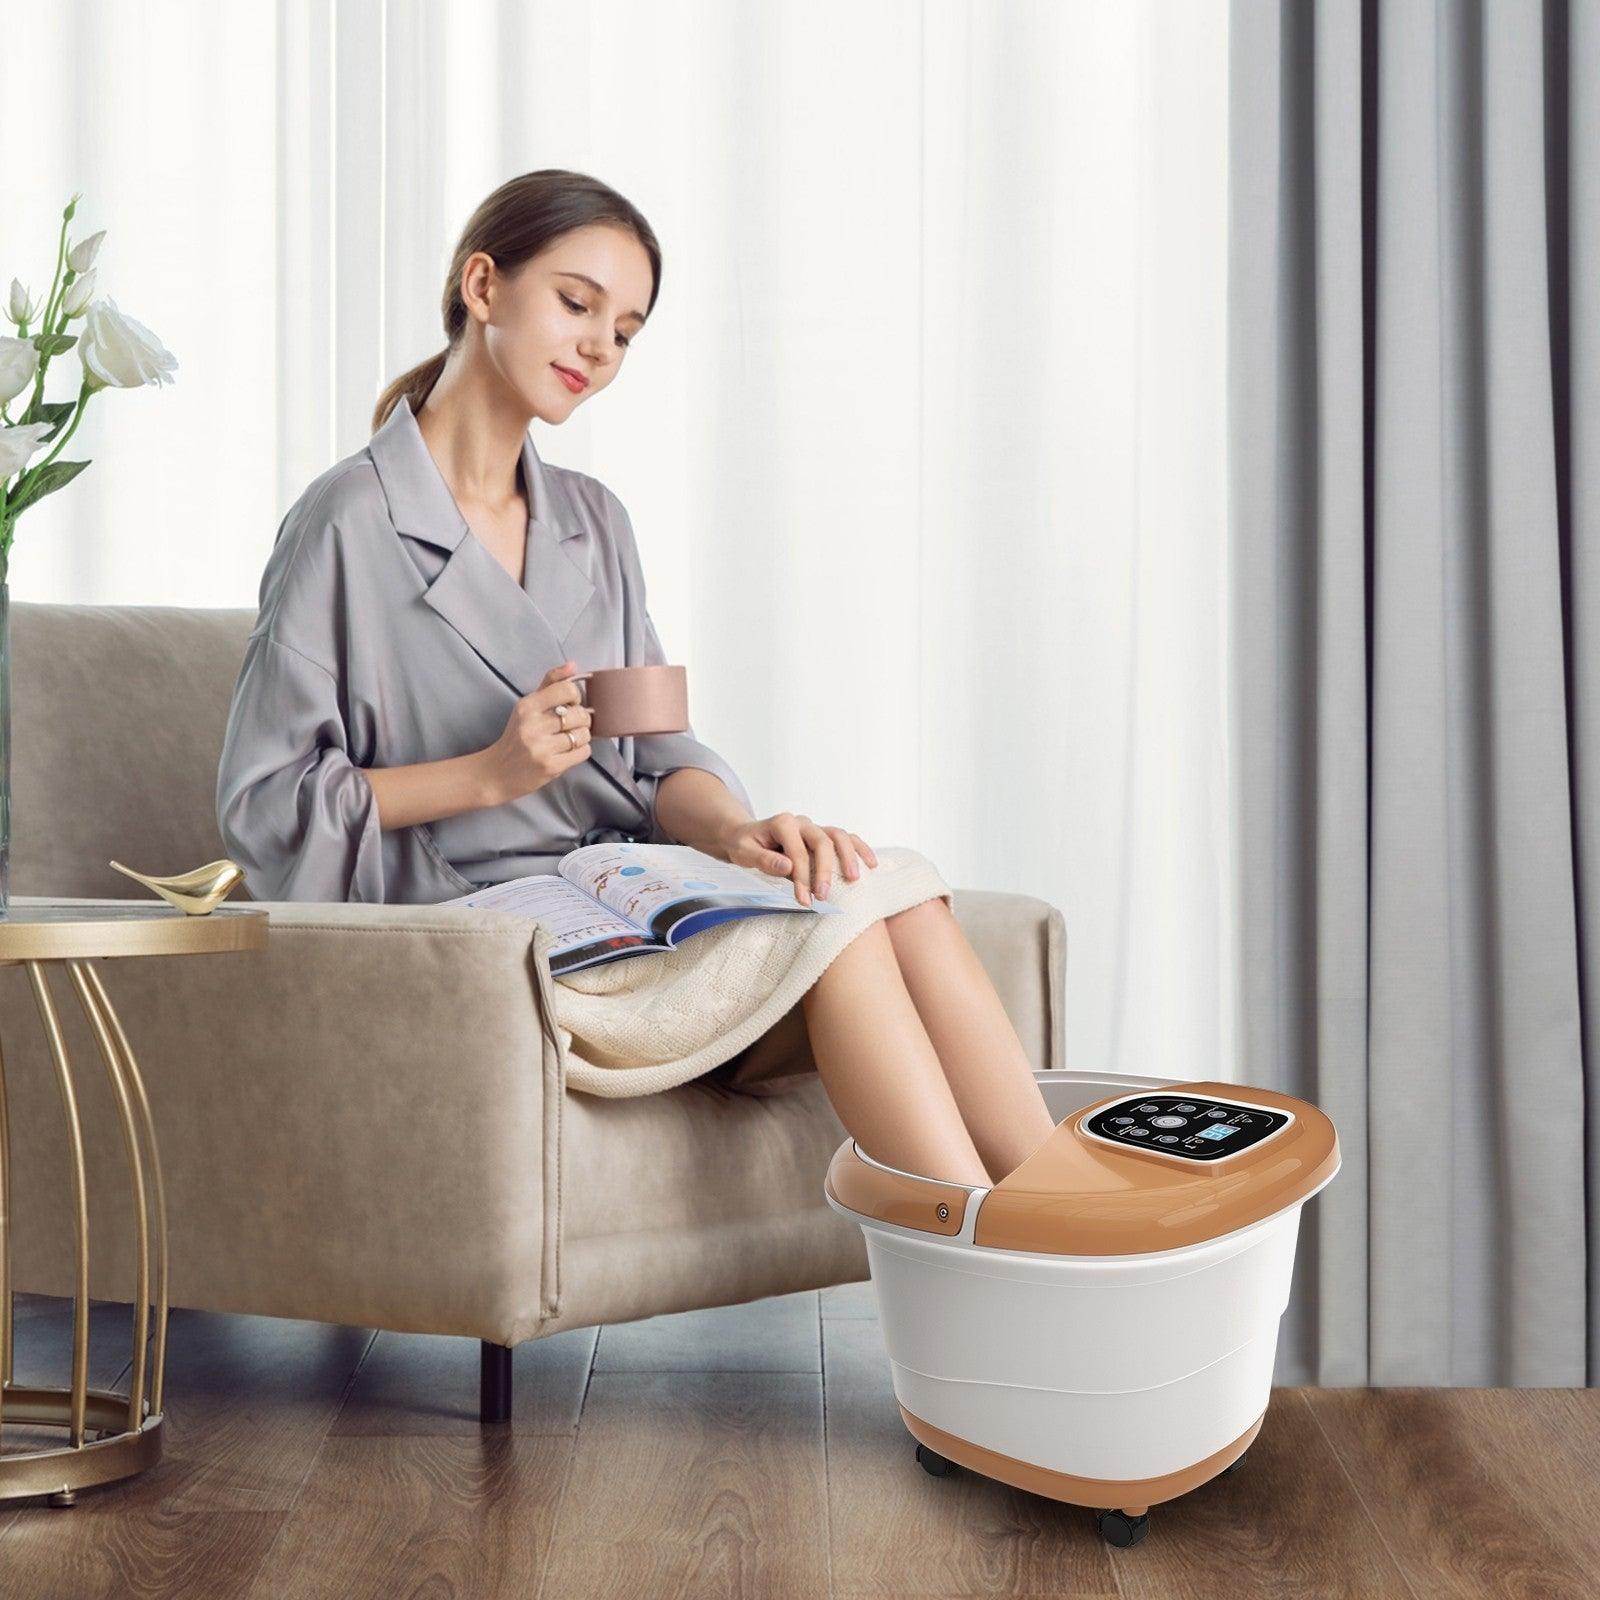 All-in-One Heat Bubble Vibration Foot Spa Massager with 6 Massage Rollers 13850496 - YOURISHOP.COM